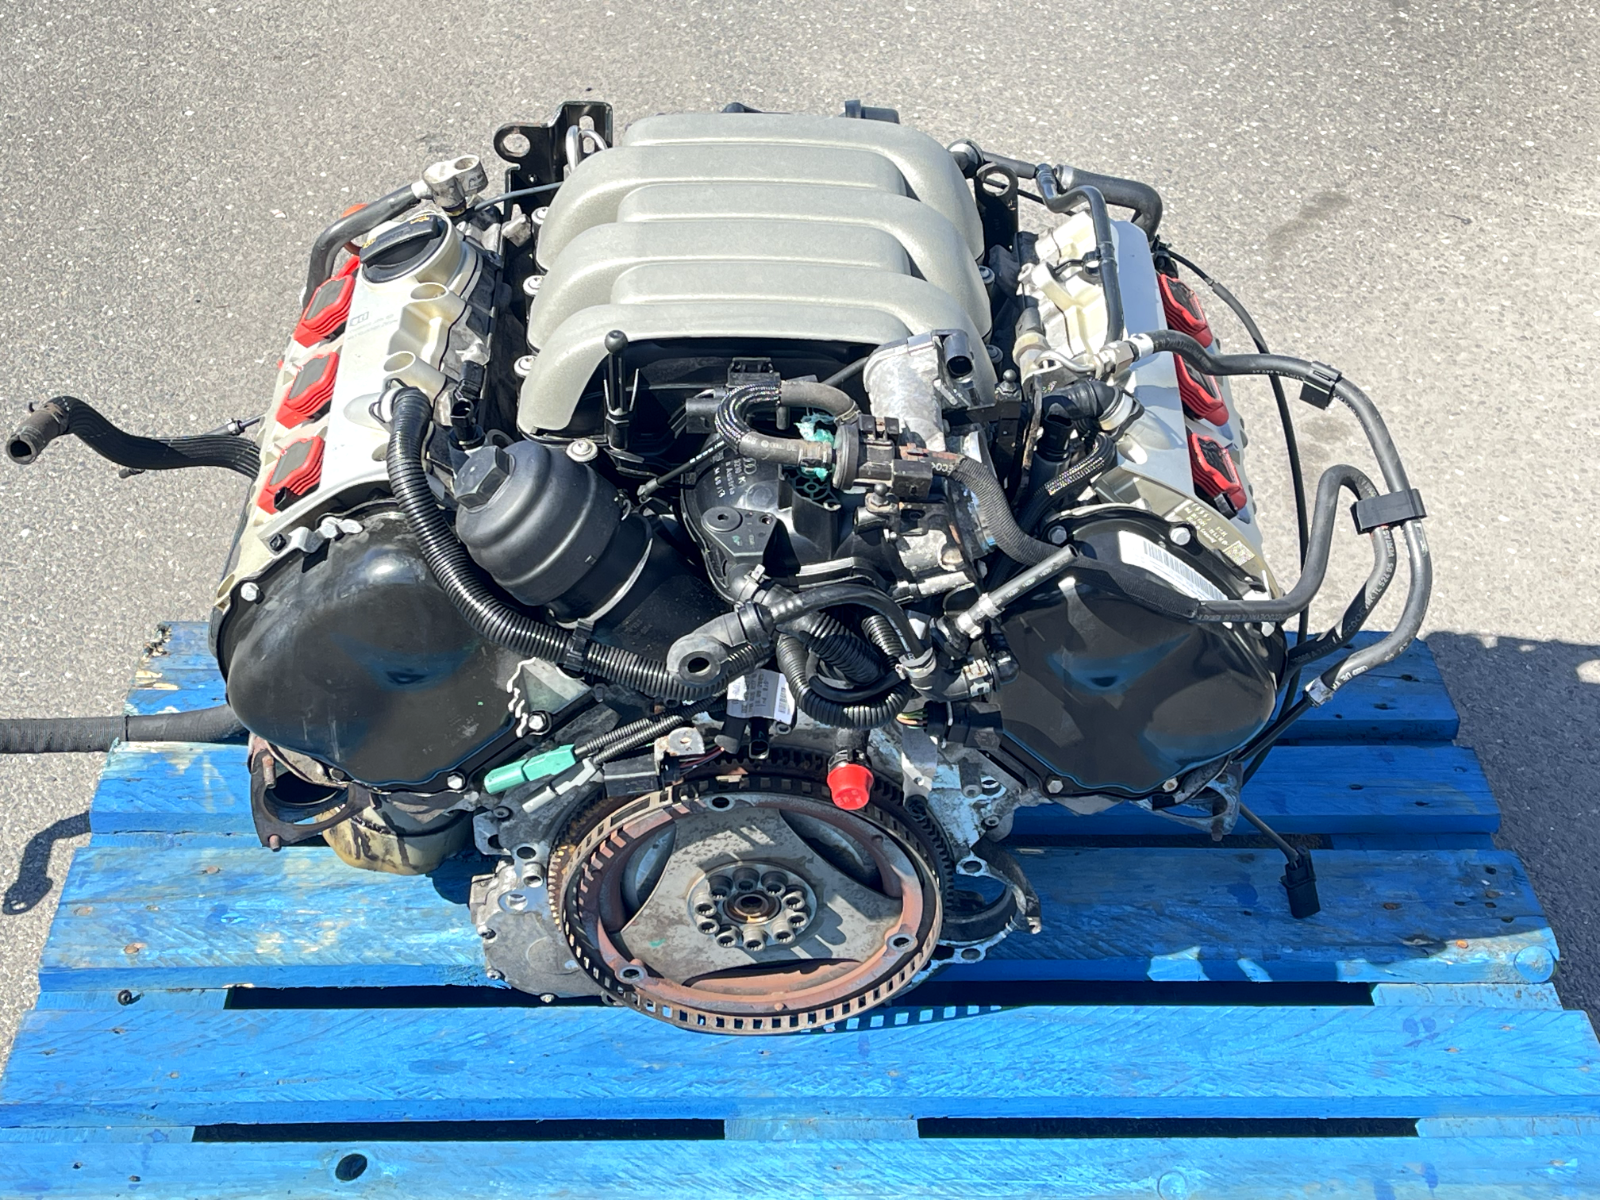 Audi A4 3.2 V6 engines 2005 to 2009